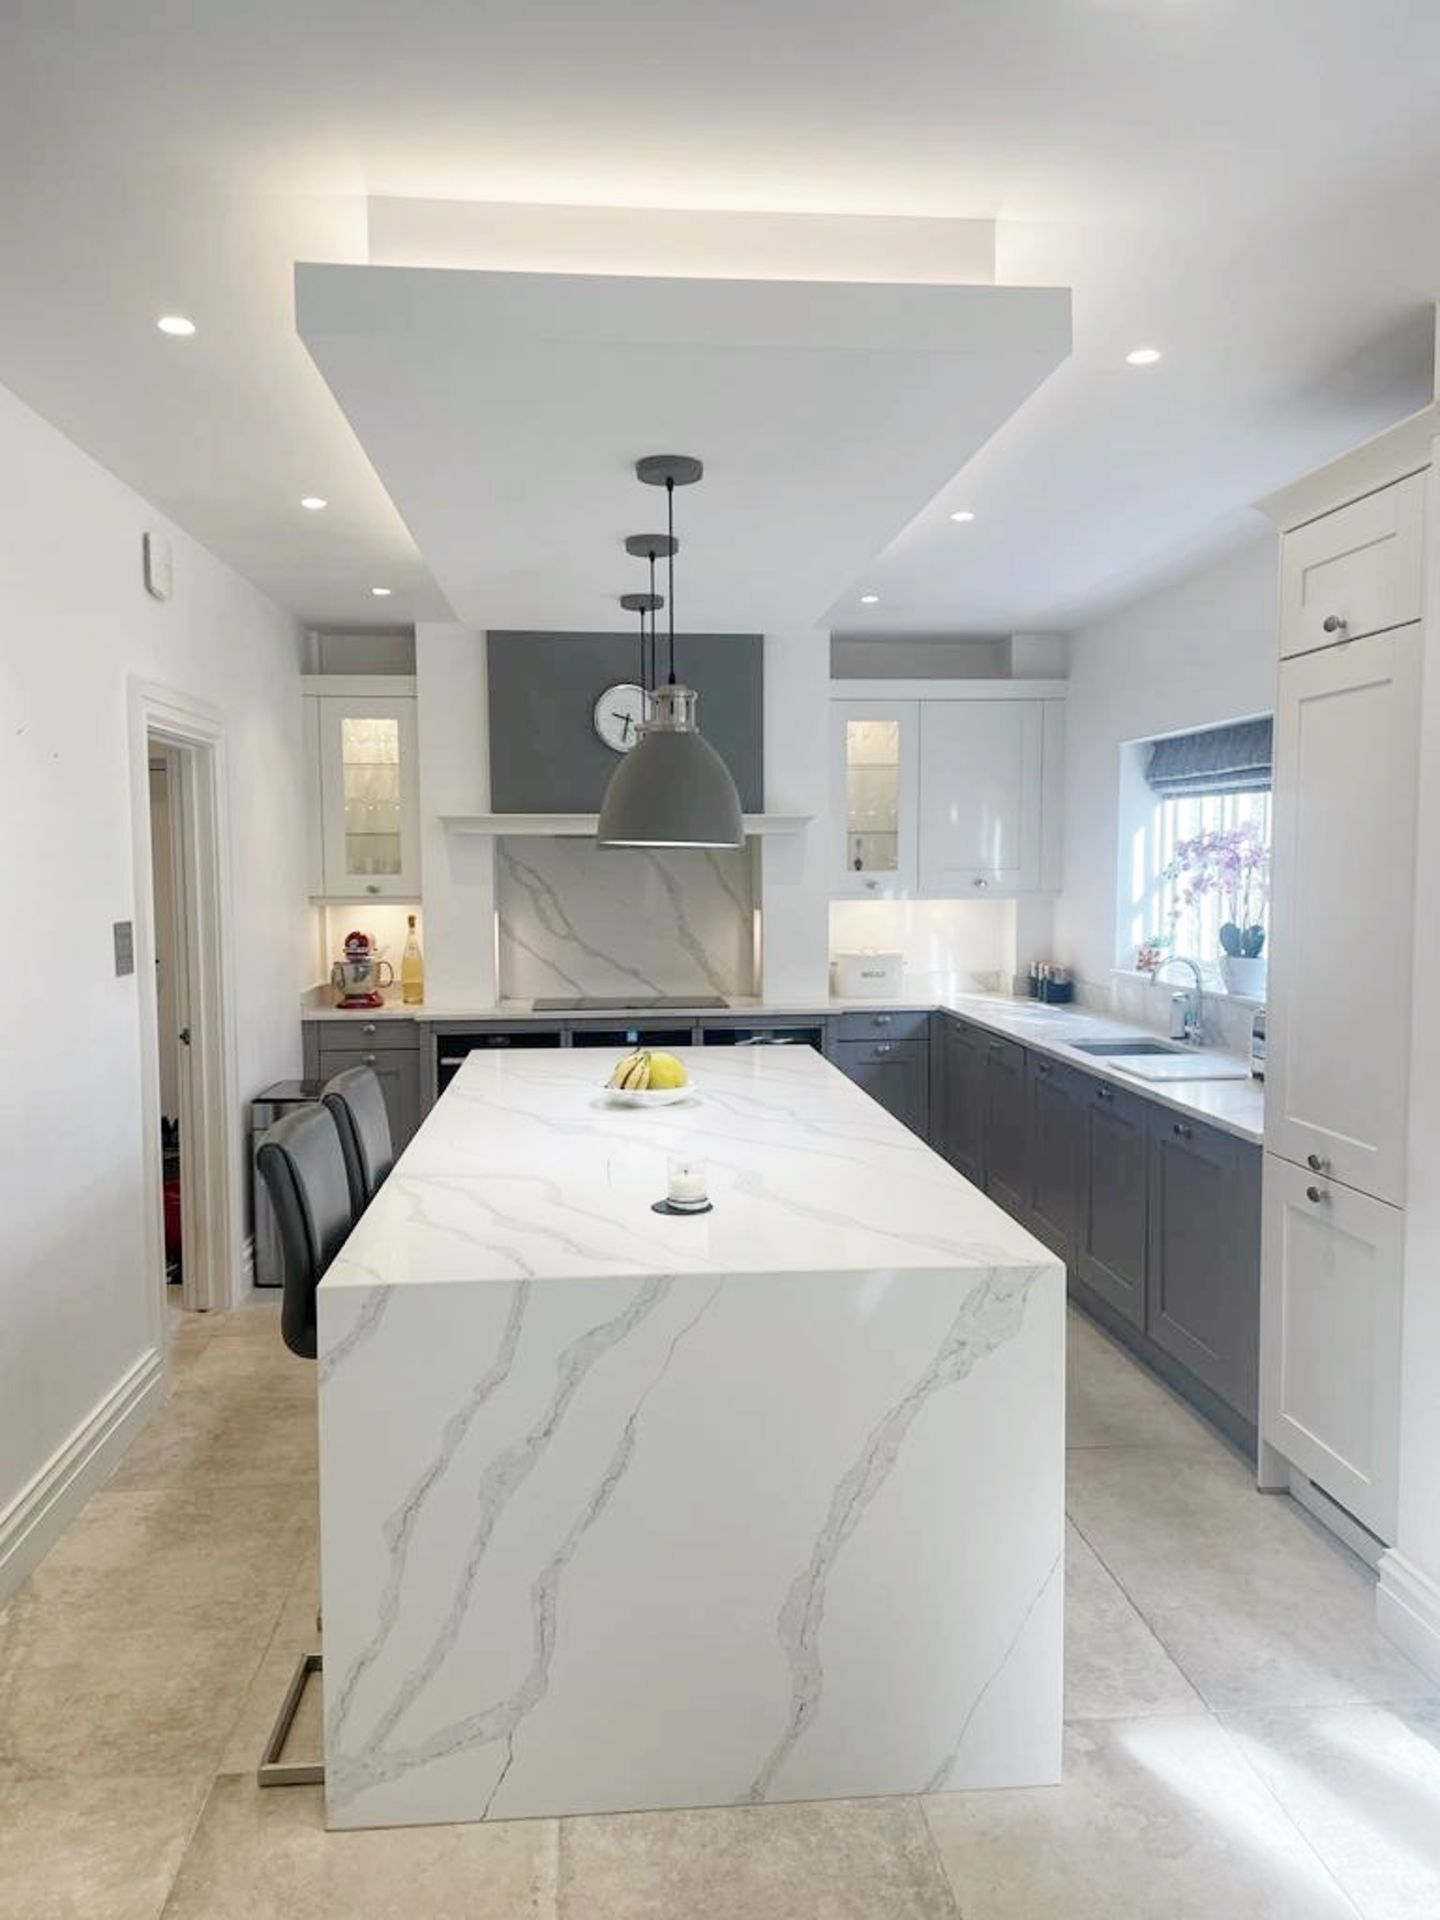 1 x SIEMATIC Bespoke Shaker-style Fitted Kitchen, Utility Room, Appliances & Modern Quartz Surfaces - Image 77 of 99